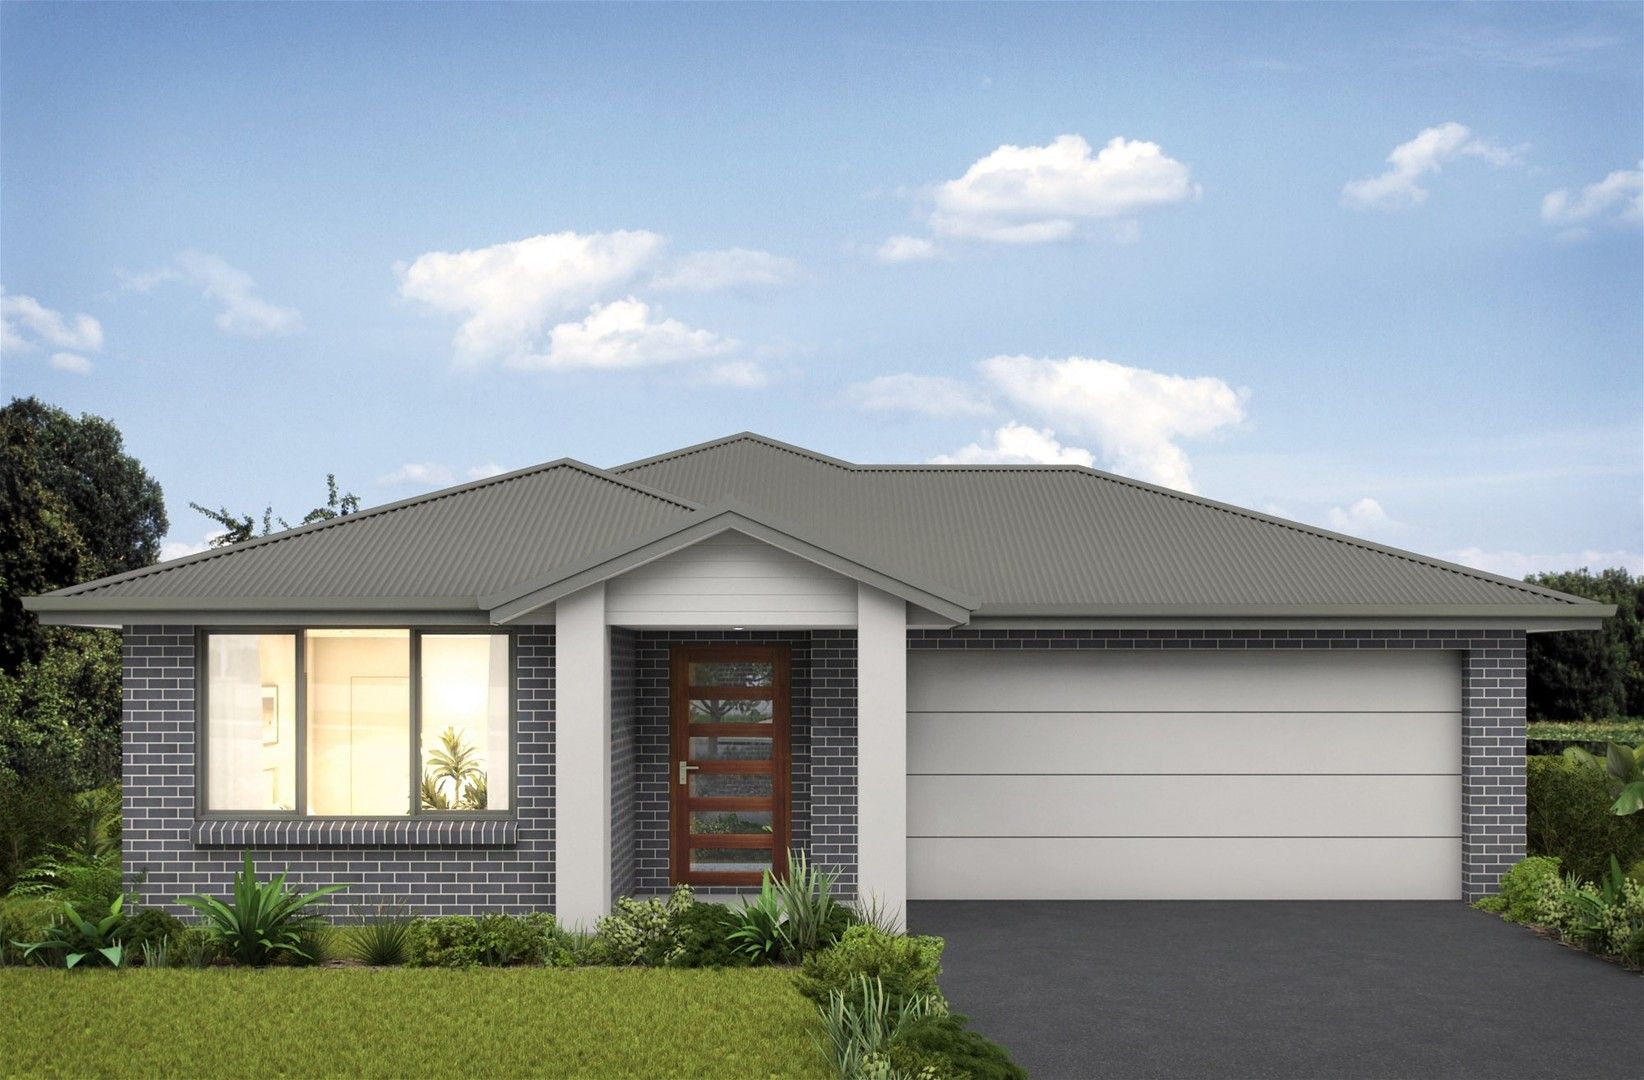 4 bedrooms New House & Land in Address on request Address on request TAHMOOR NSW, 2573